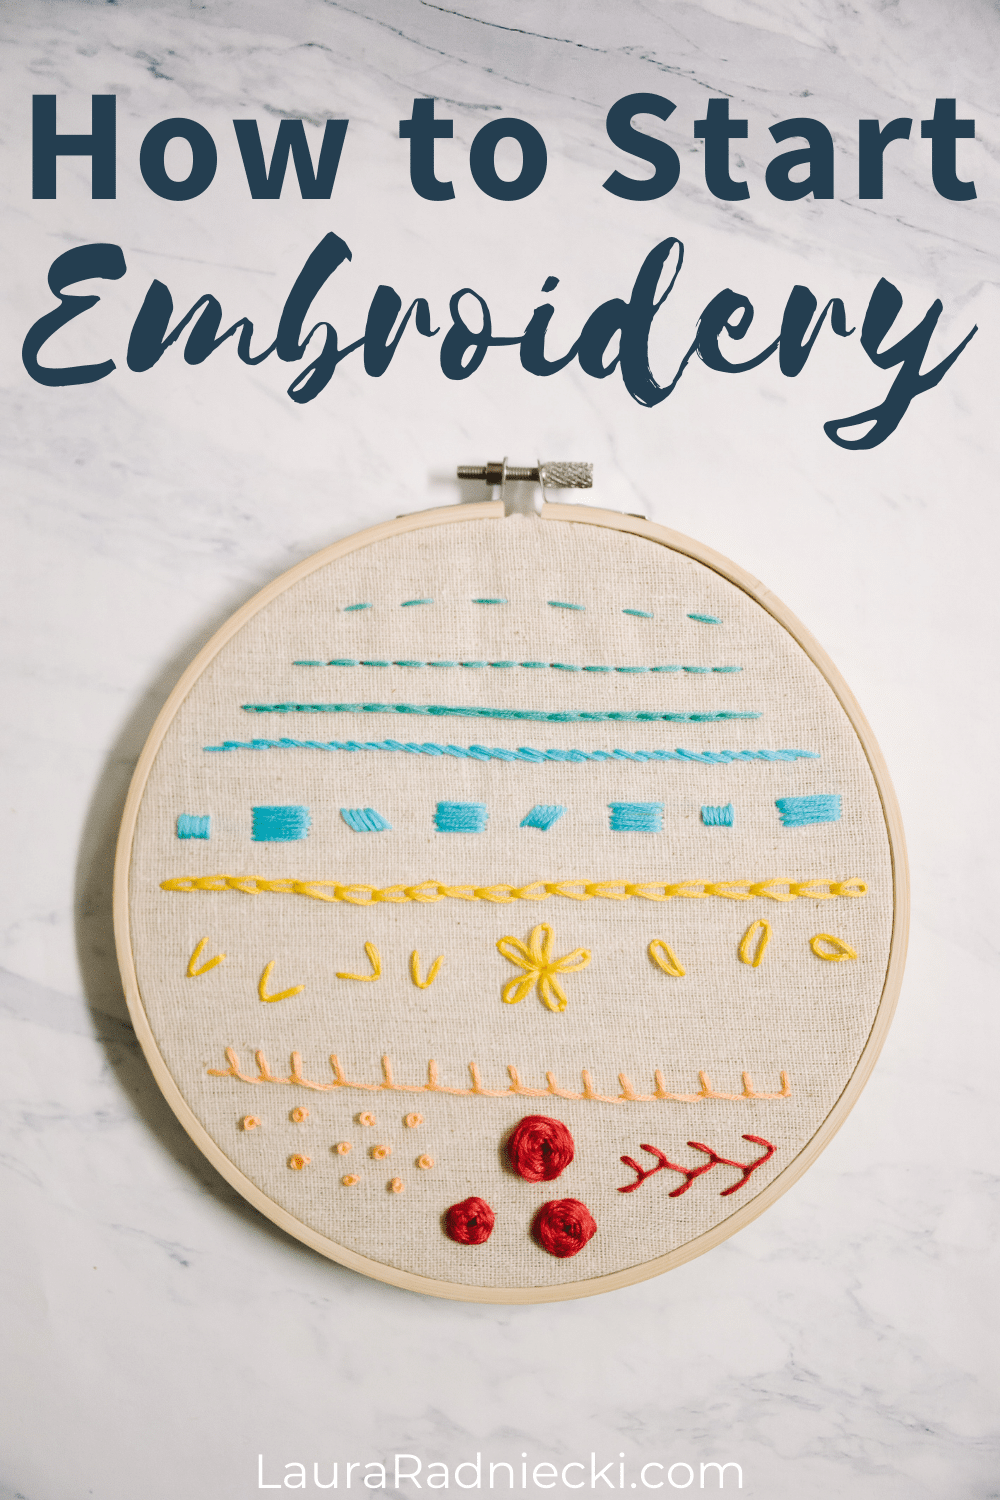 Embroidery Basics 101 | Best Fabric for Embroidery